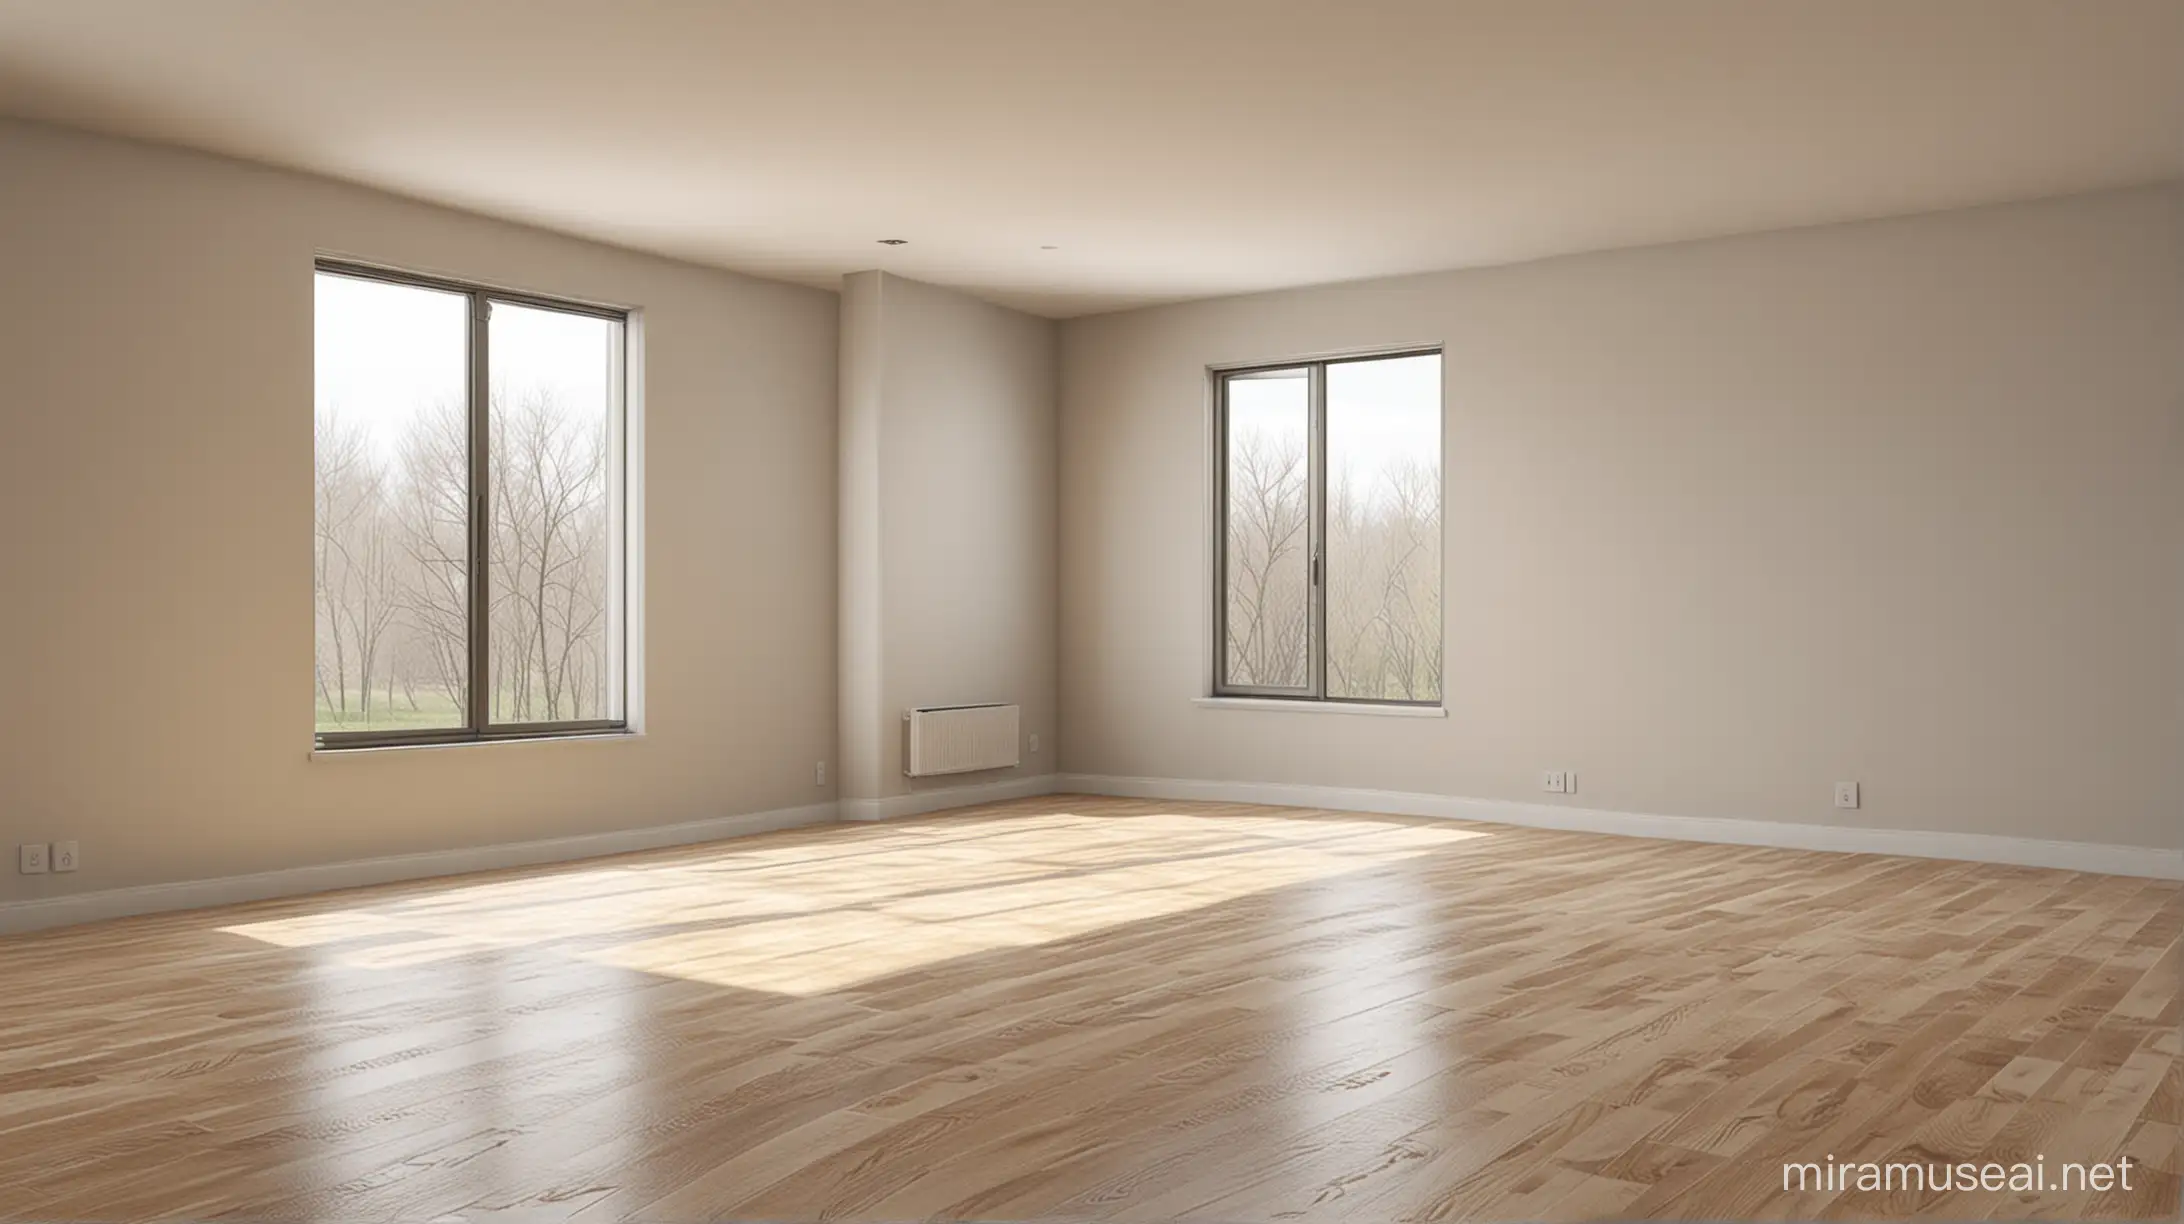 Spacious Empty Room with Natural Lighting Realistic 3D Rendering